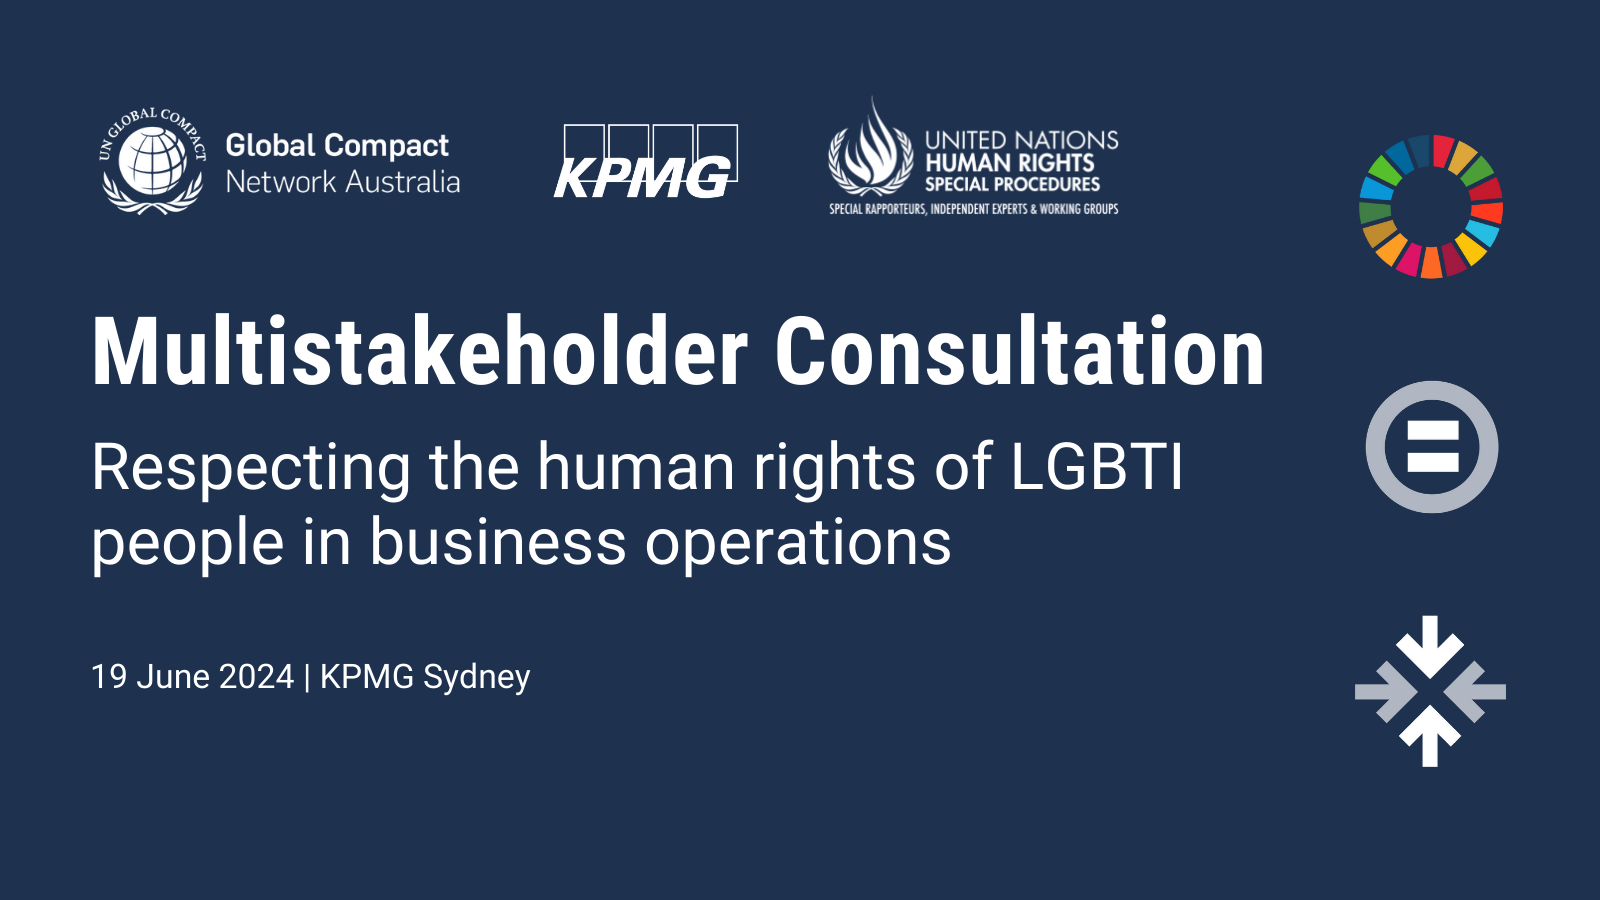 Multistakeholder Consultation | Respecting the human rights of LGBTI people in business operations